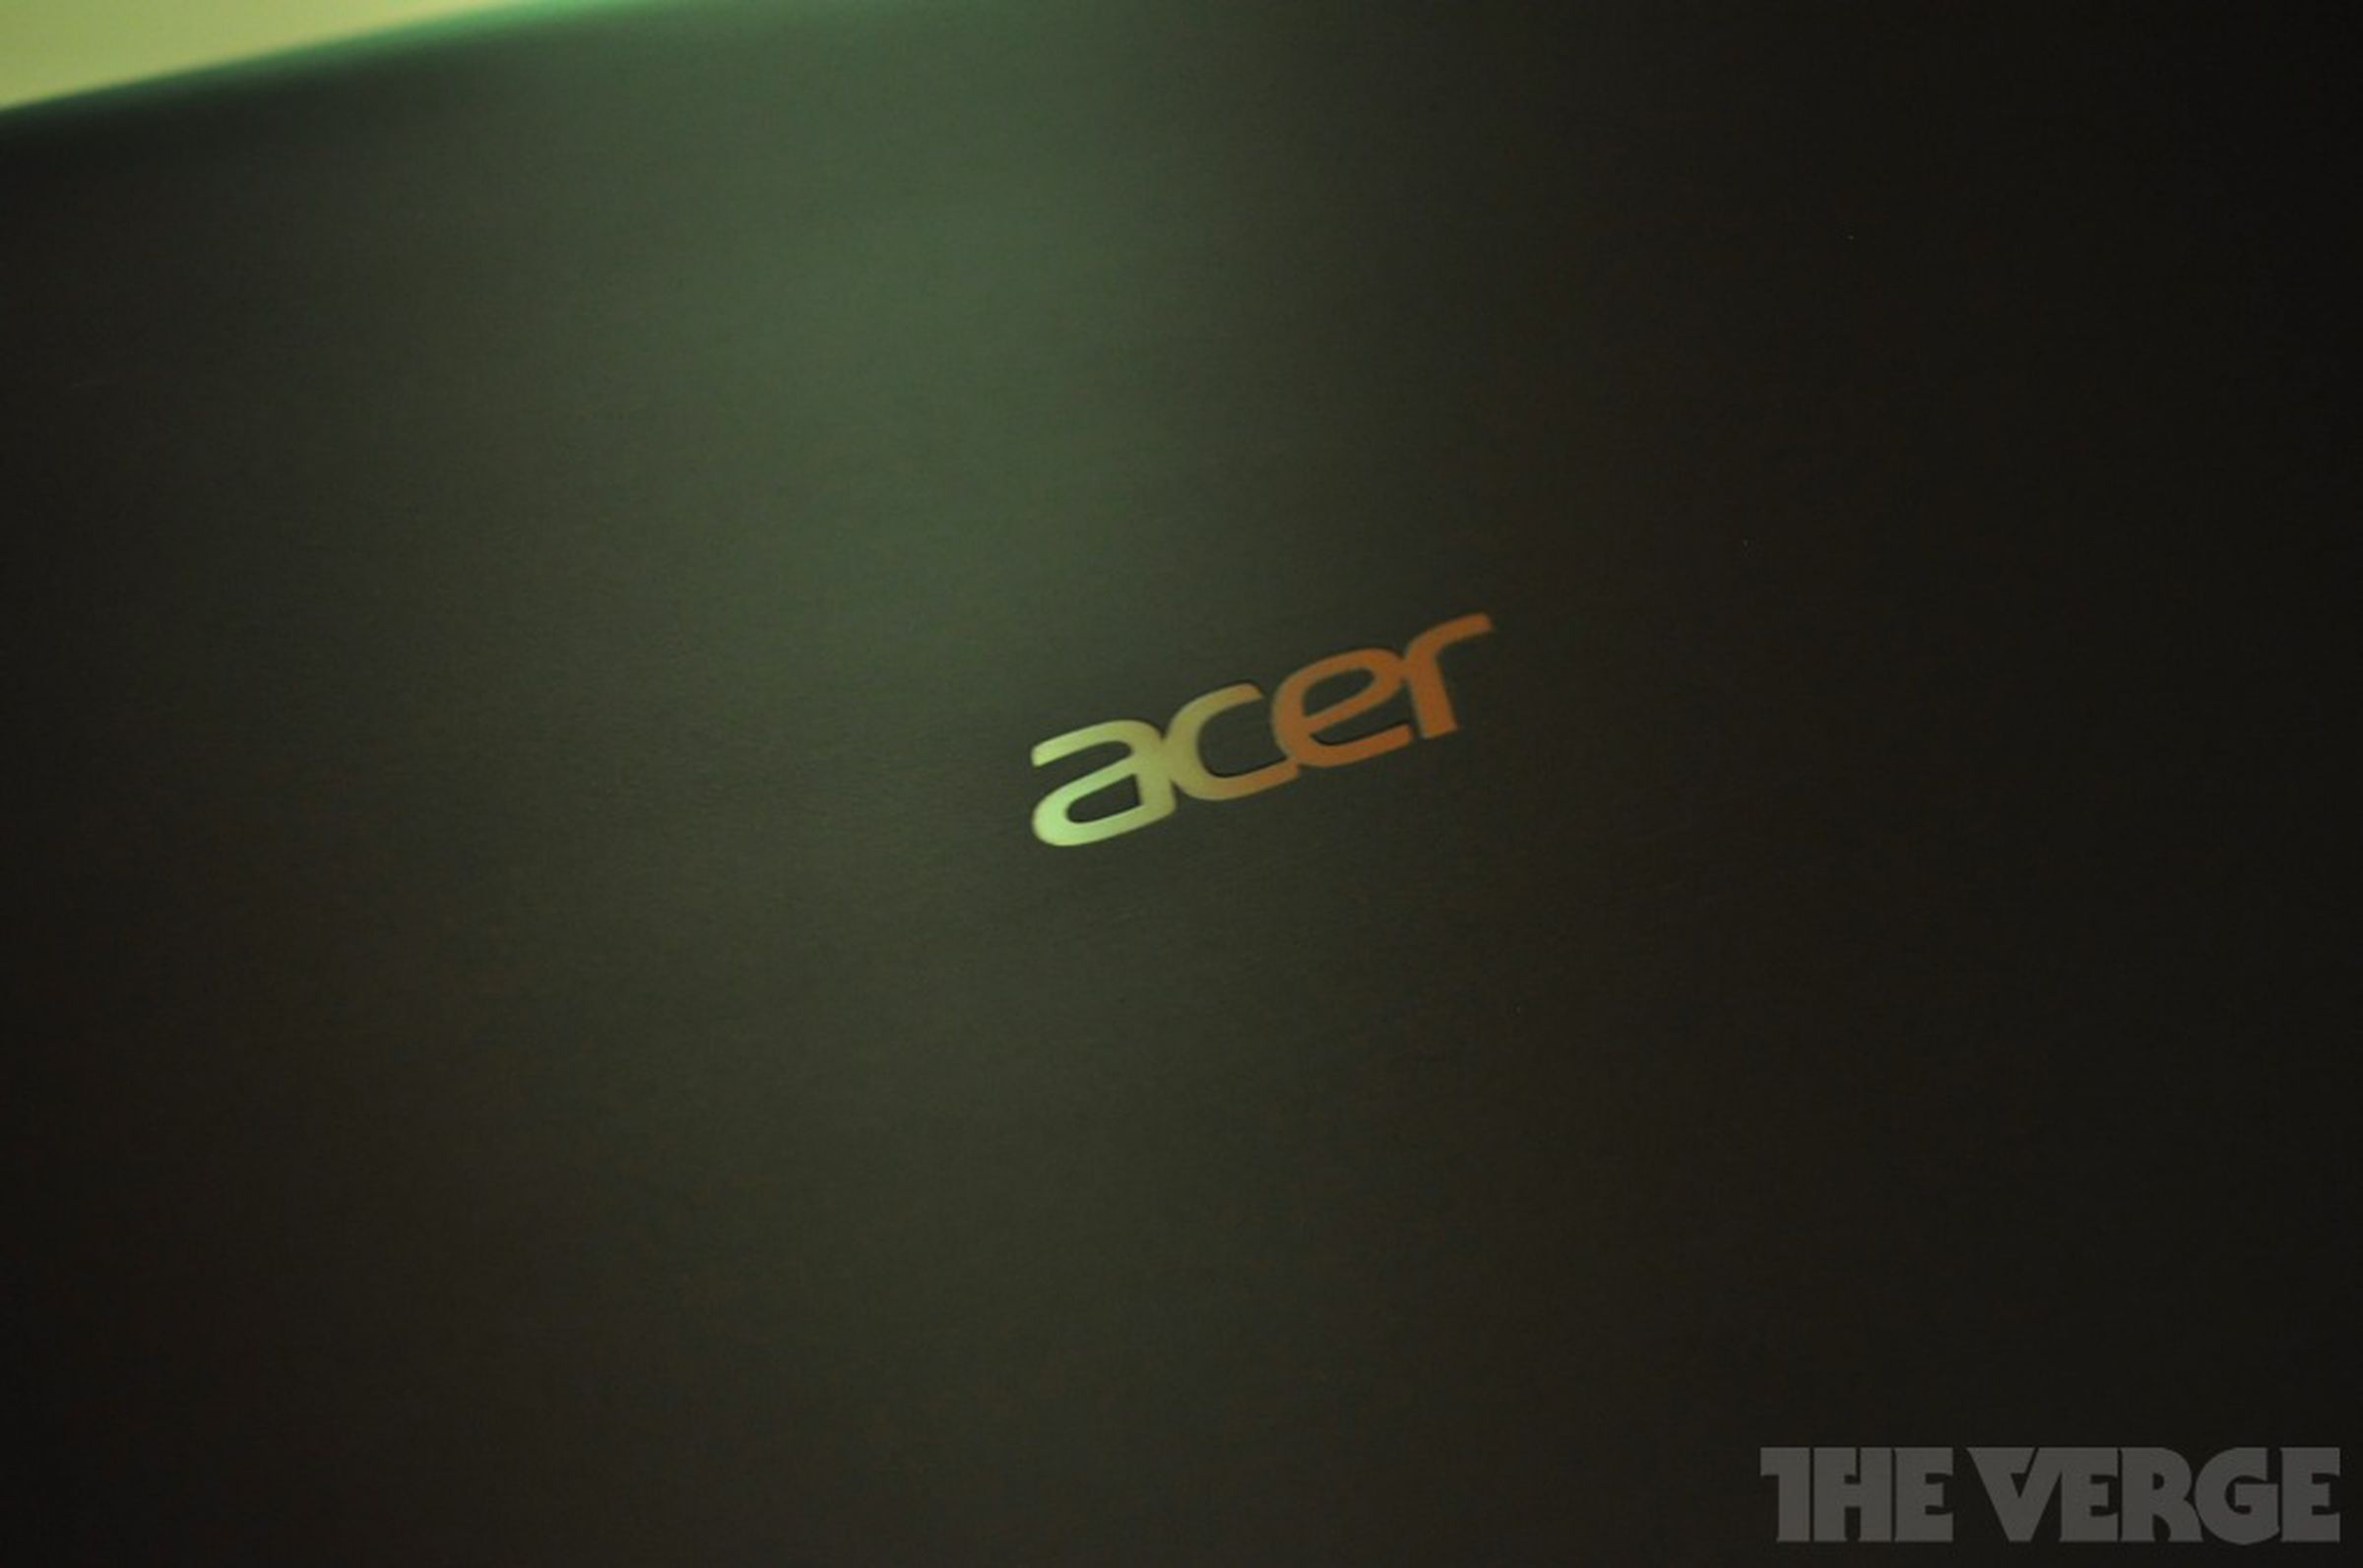 Acer Aspire S5 hands-on photos